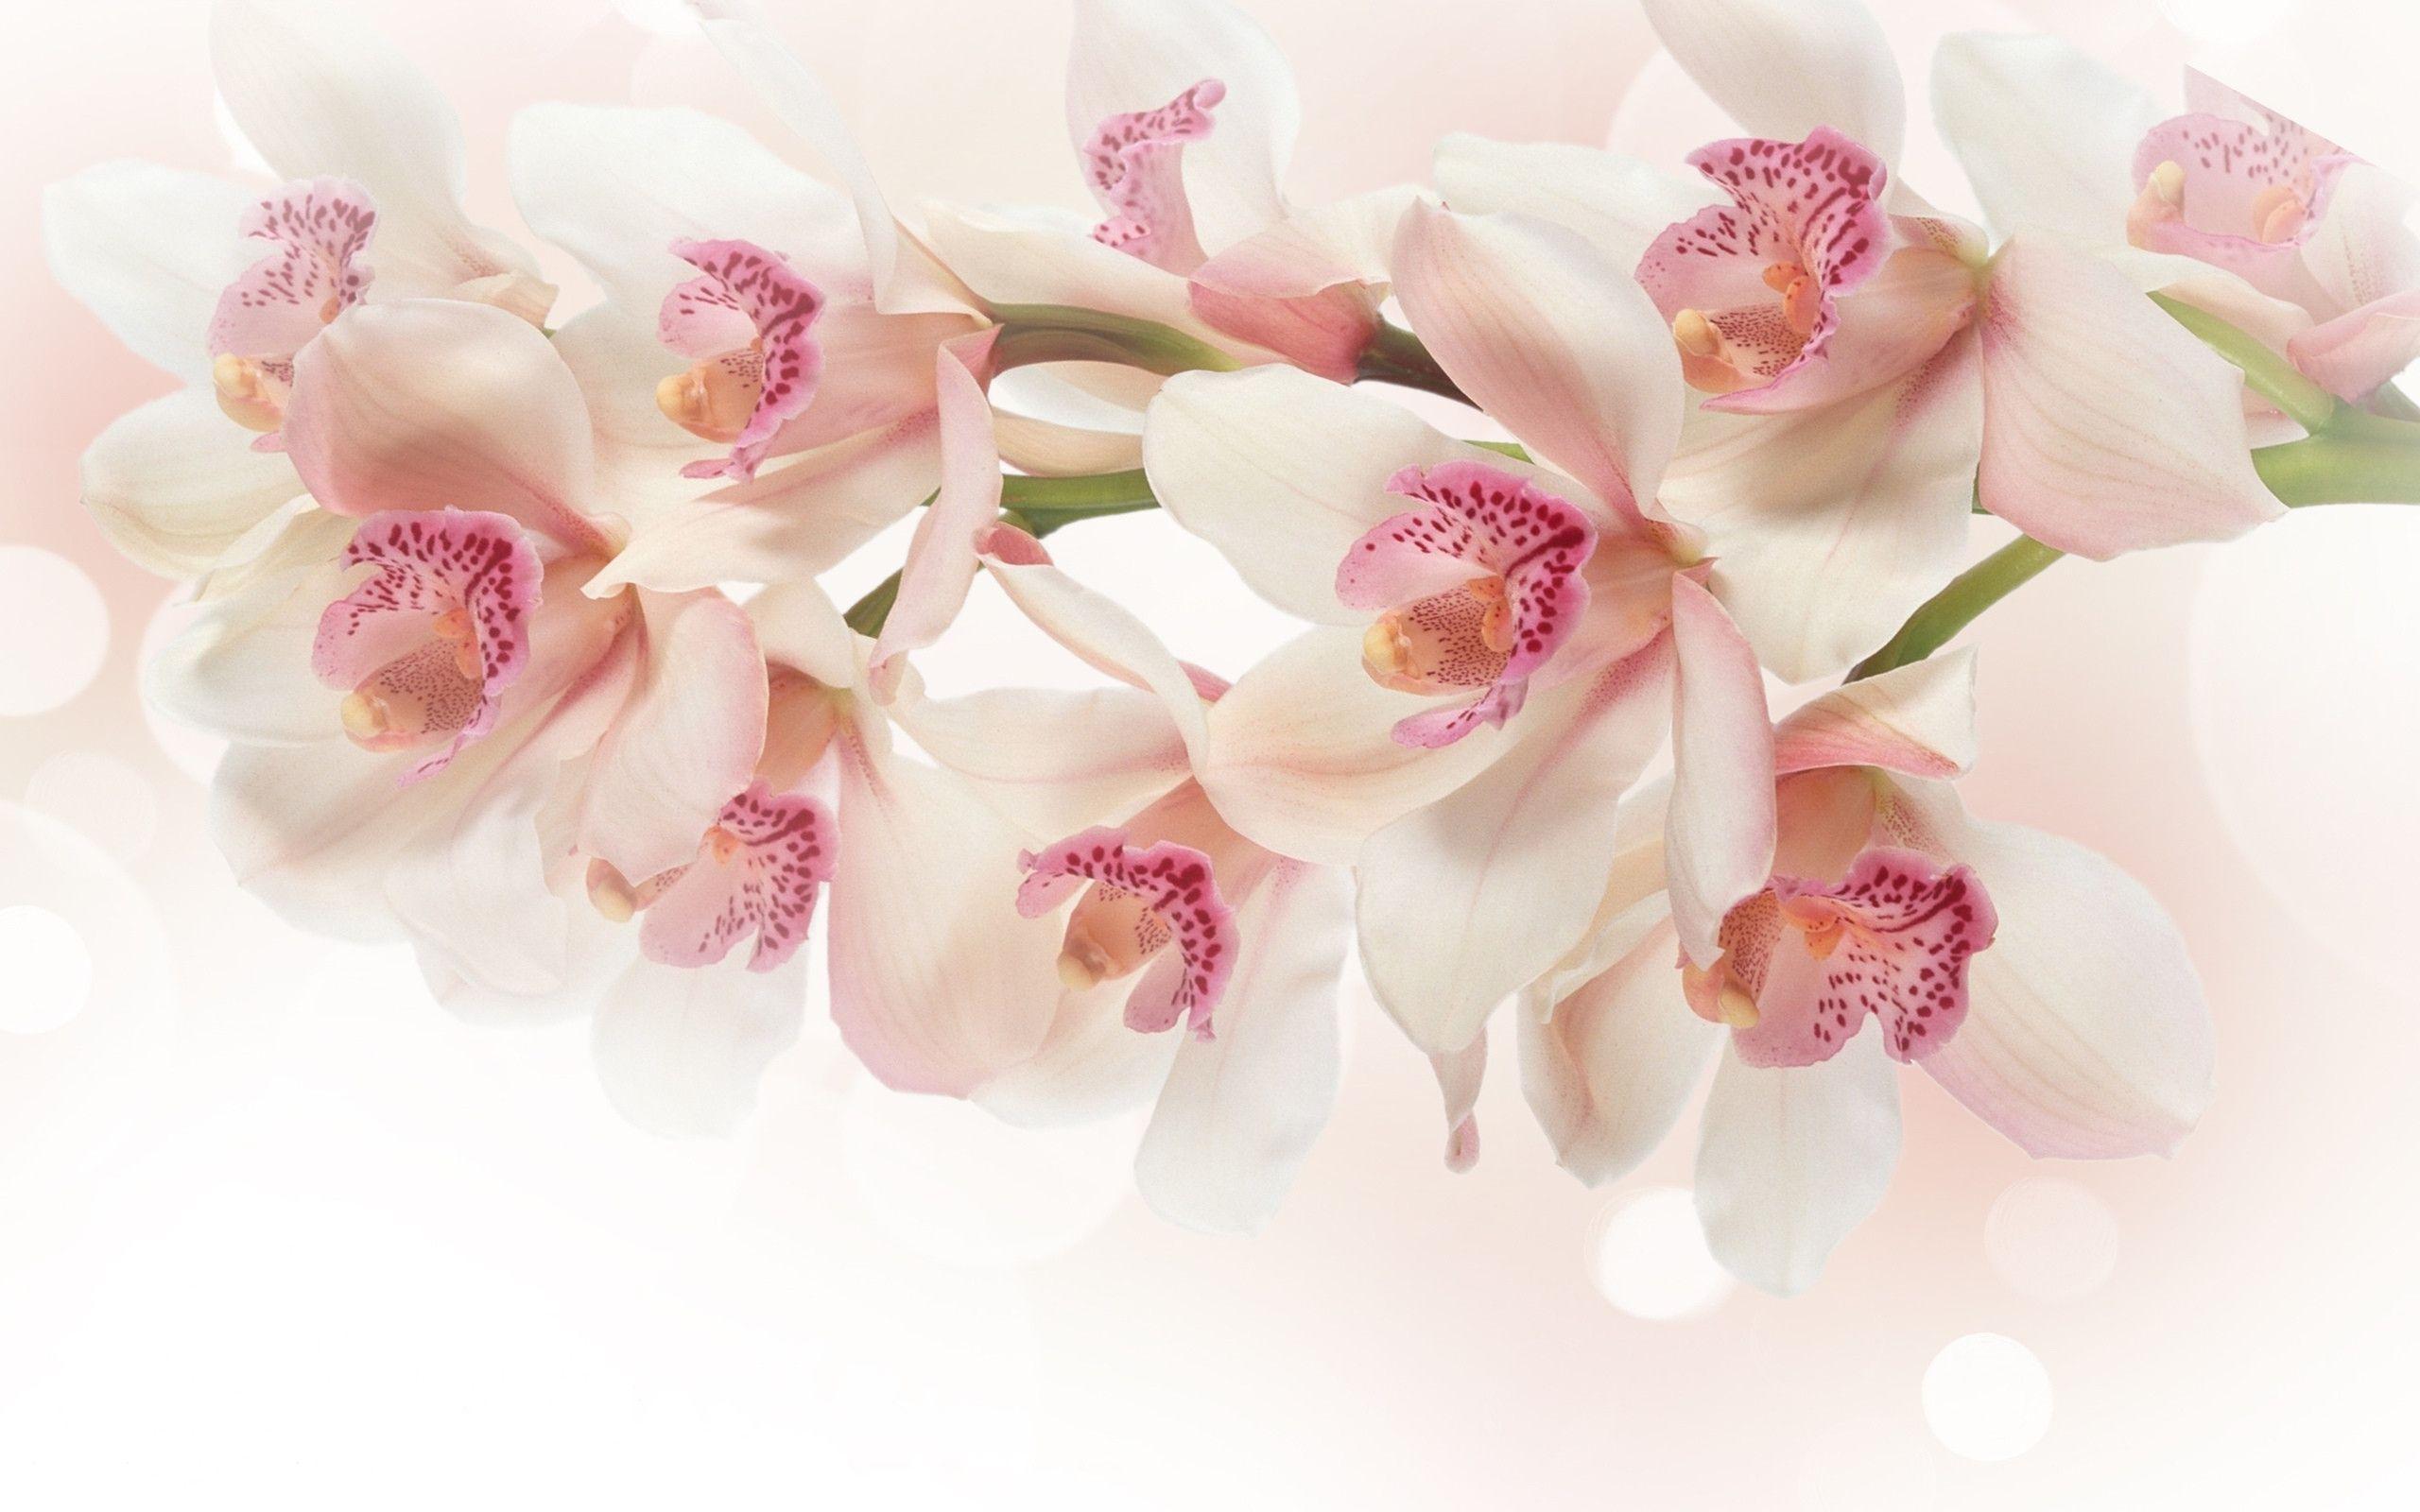 White Orchid Wallpapers - Wallpaper Cave